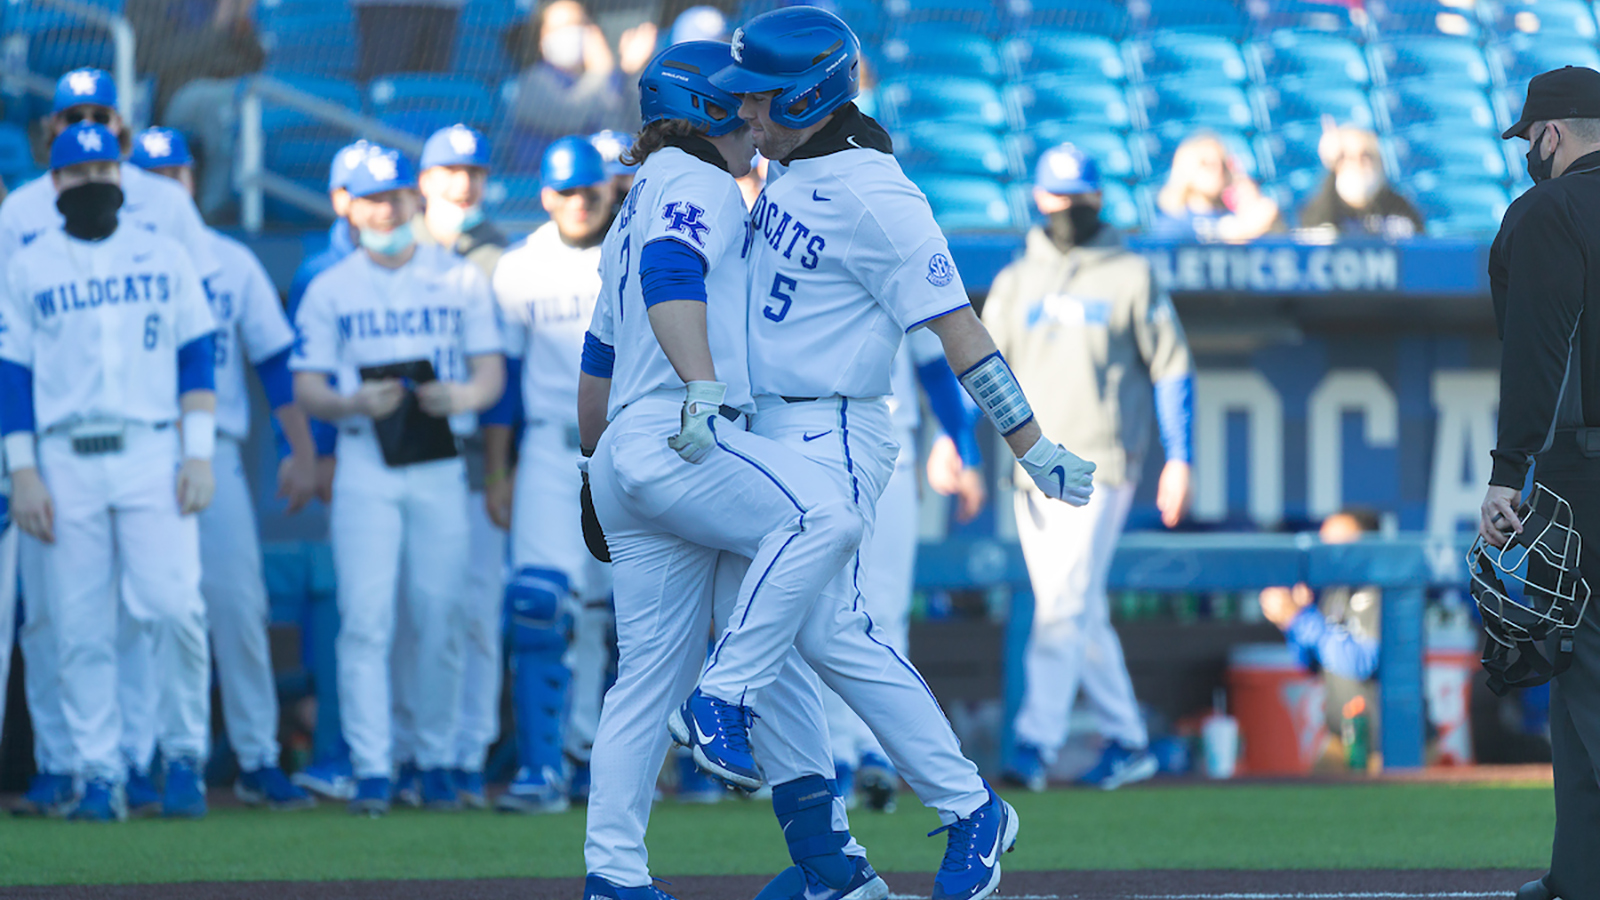 Cats Start Season in Style with Big First Inning